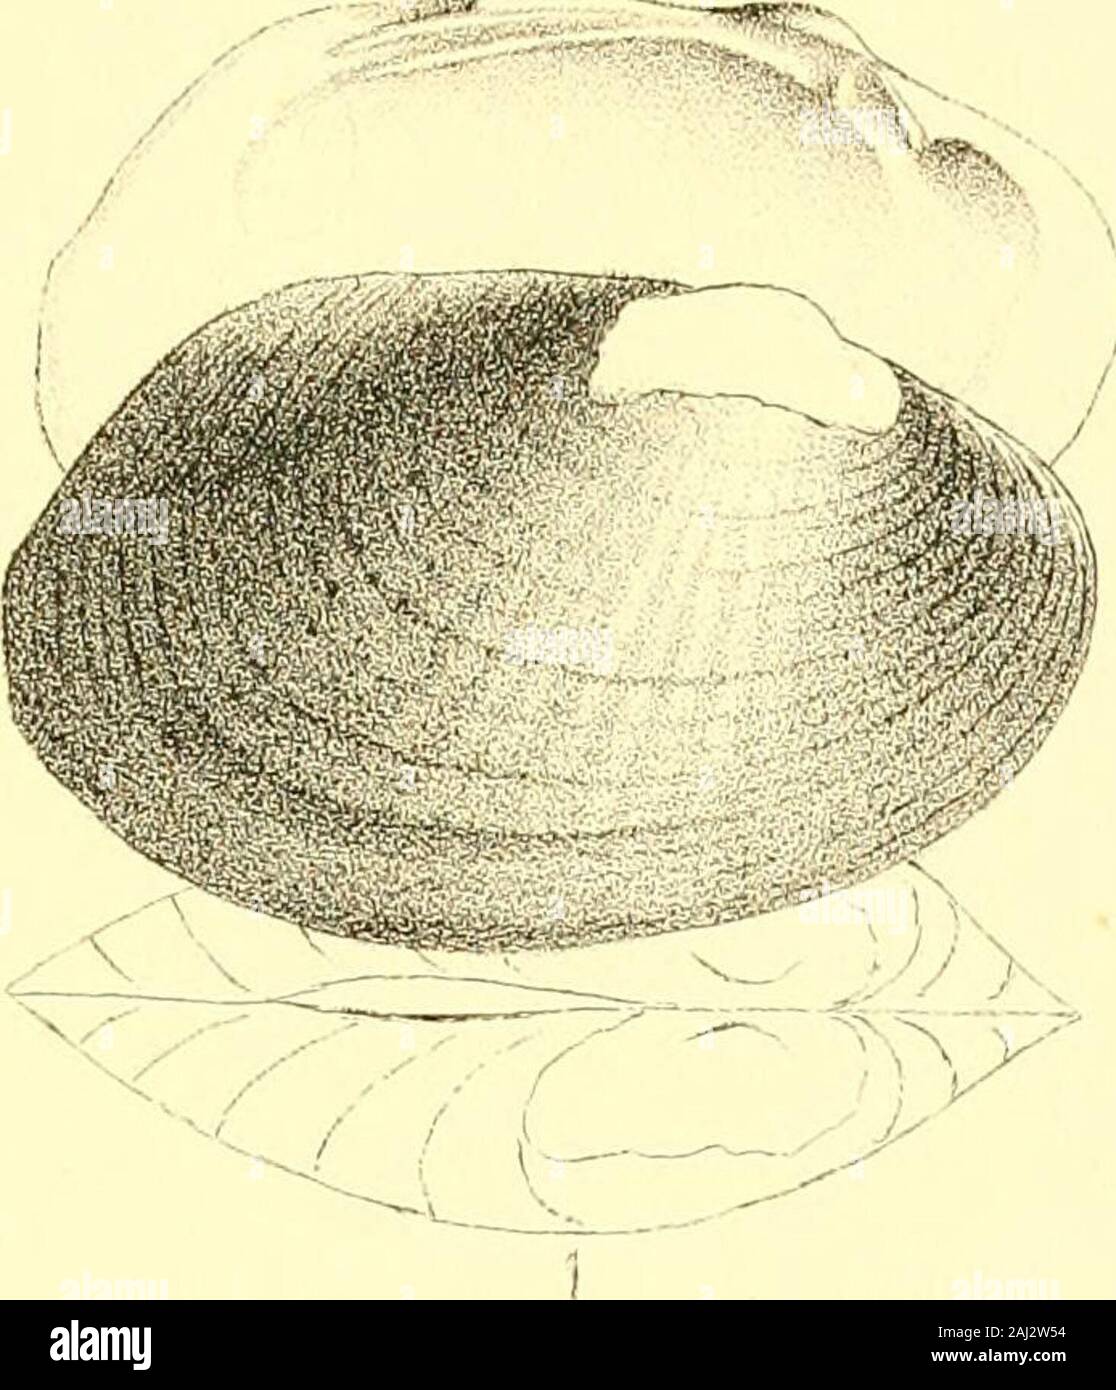 Monography of the family Unionidæ : or, Naiades of Lamarck (fresh water bivalve shells) of North America ... . esented in the figure. A spi-nous Unio, no doubt the same species, is said tooccur abundantly near Columbia in South Carolina.This is a smaller species, less pointed posteriorly,and otherwise distinct from the U. spinosus of Lea. UNIO TRABALIS. Plate LX.—Fig. 2. DESCRIPTION. Shell oblong-ovate, ventricose, thick anteriorly;anterior side short, margin obtusely rounded; poste-rior side cuneiform, produced, obtusely rounded atthe extremity, which is narrow; hinge margin decli-ning; poste Stock Photo